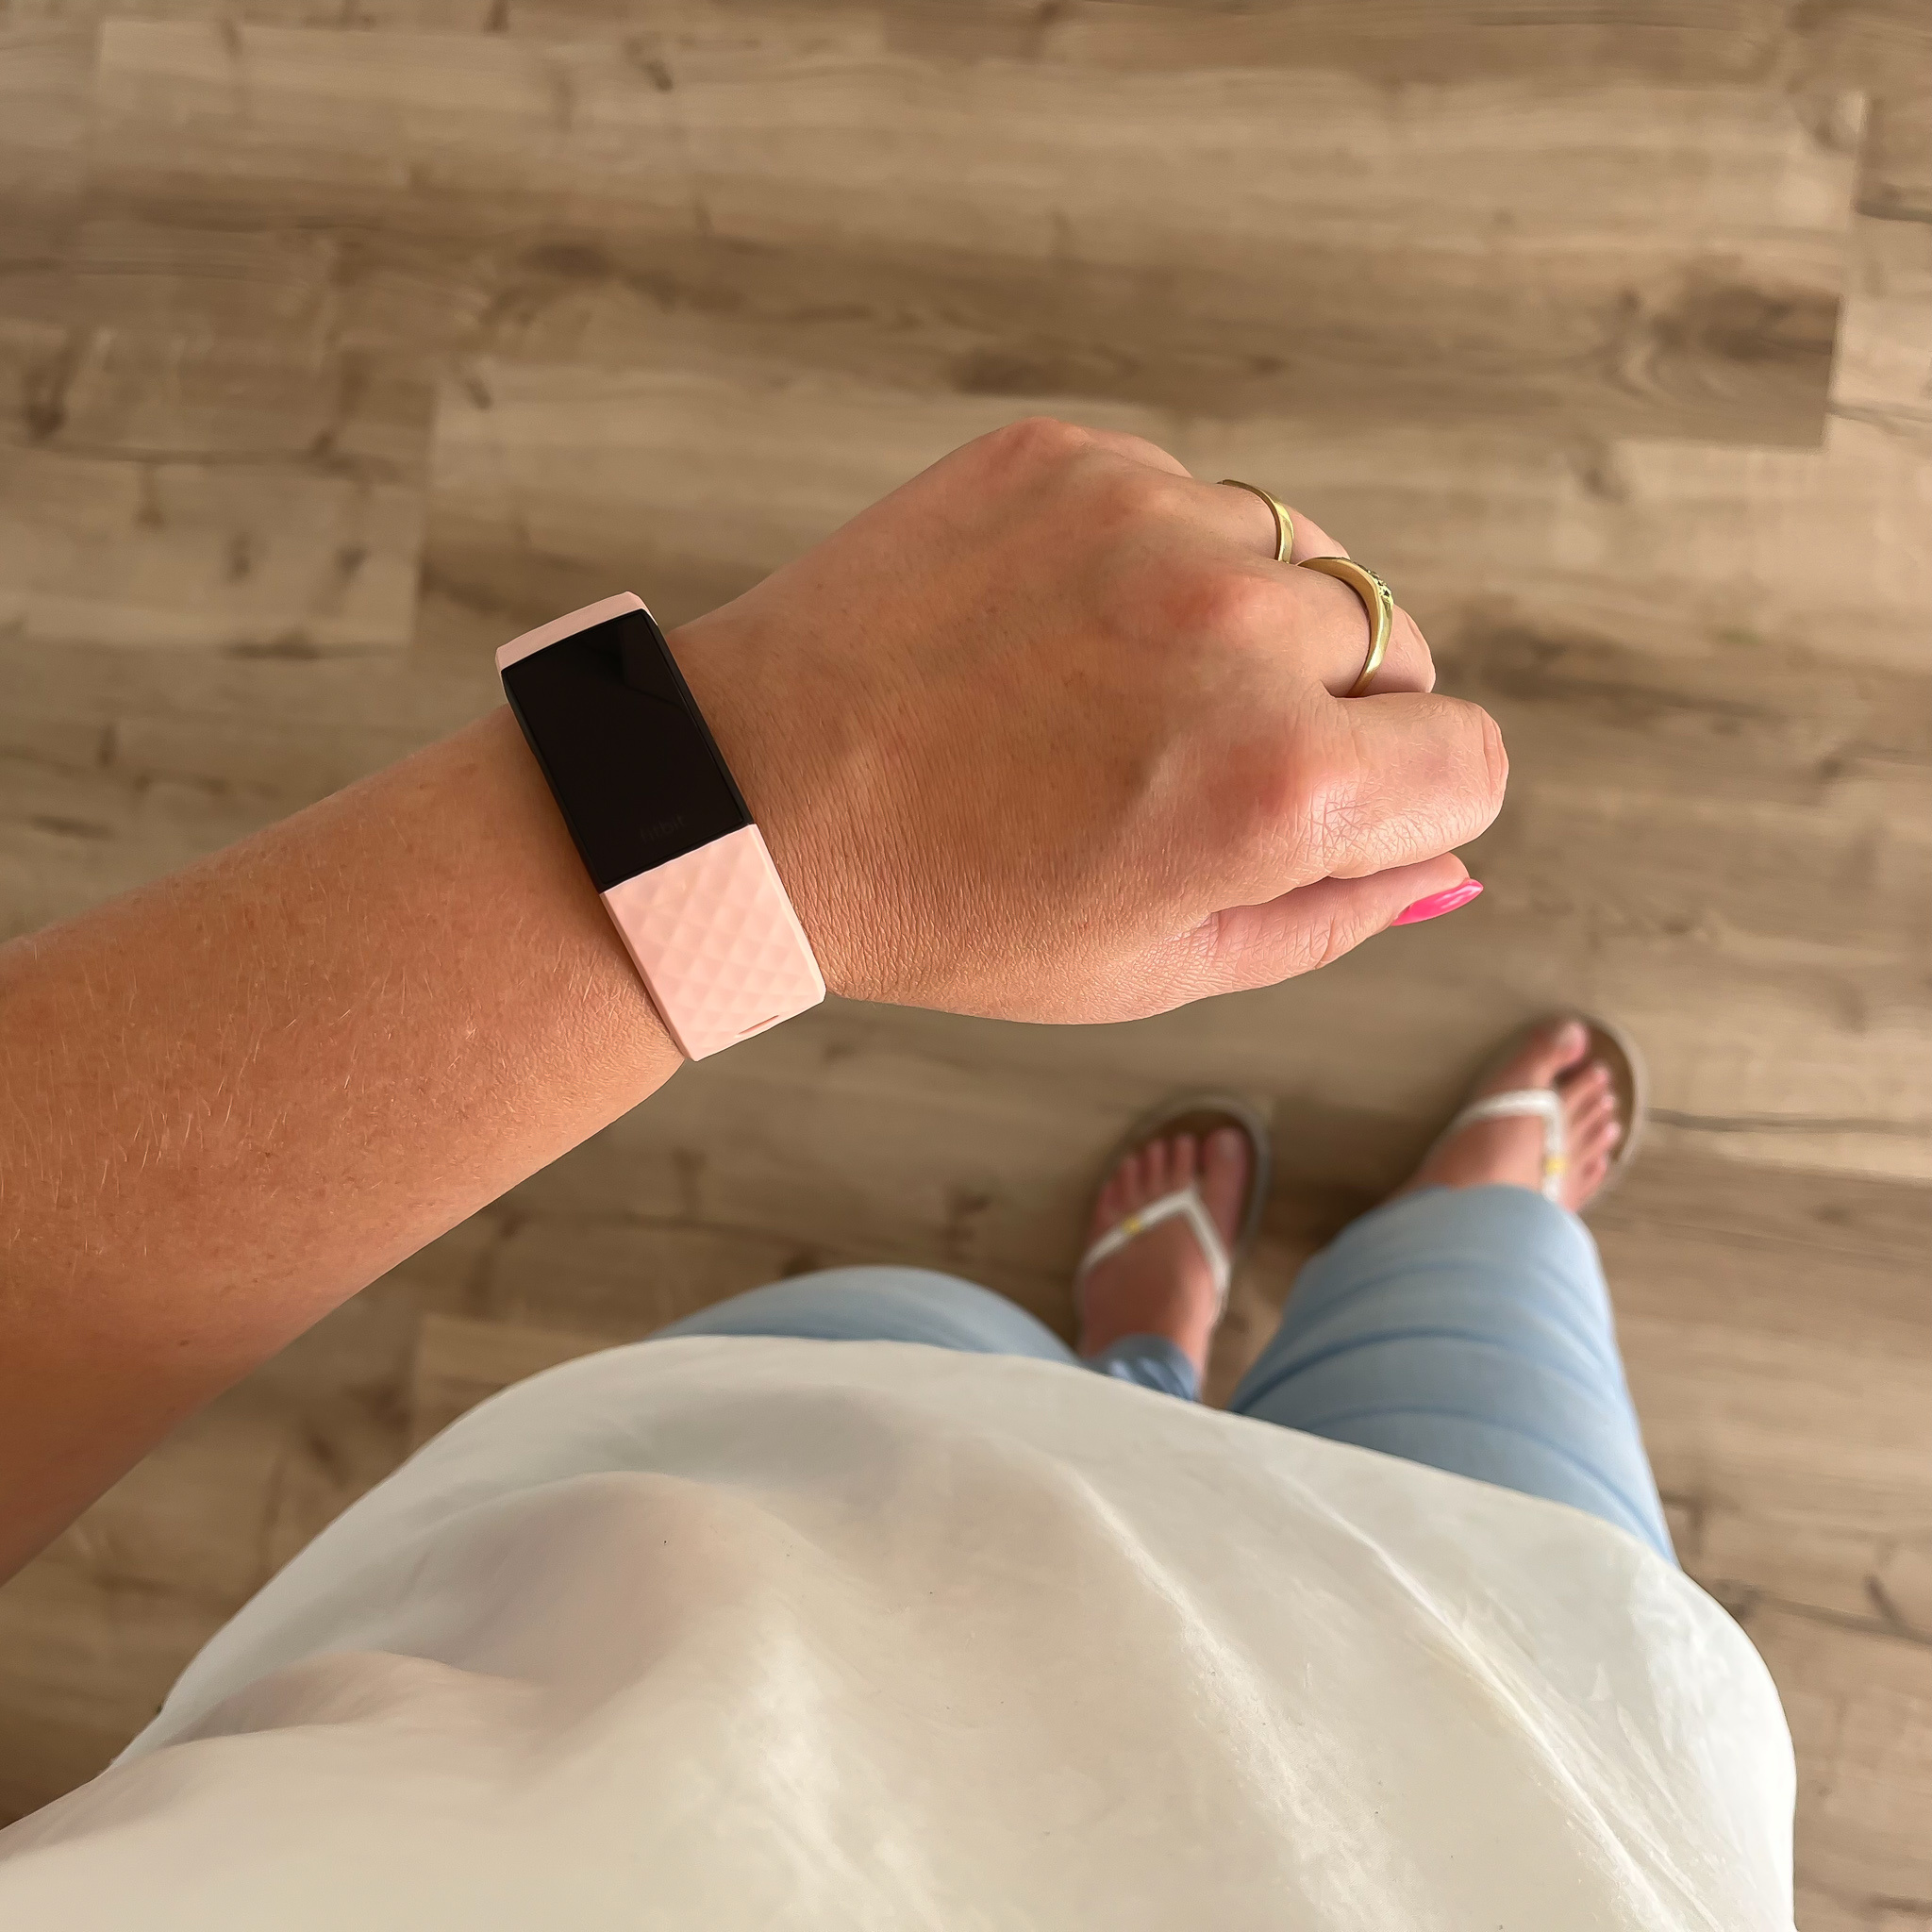 Fitbit Charge 3 & 4 sport wafel band - roze